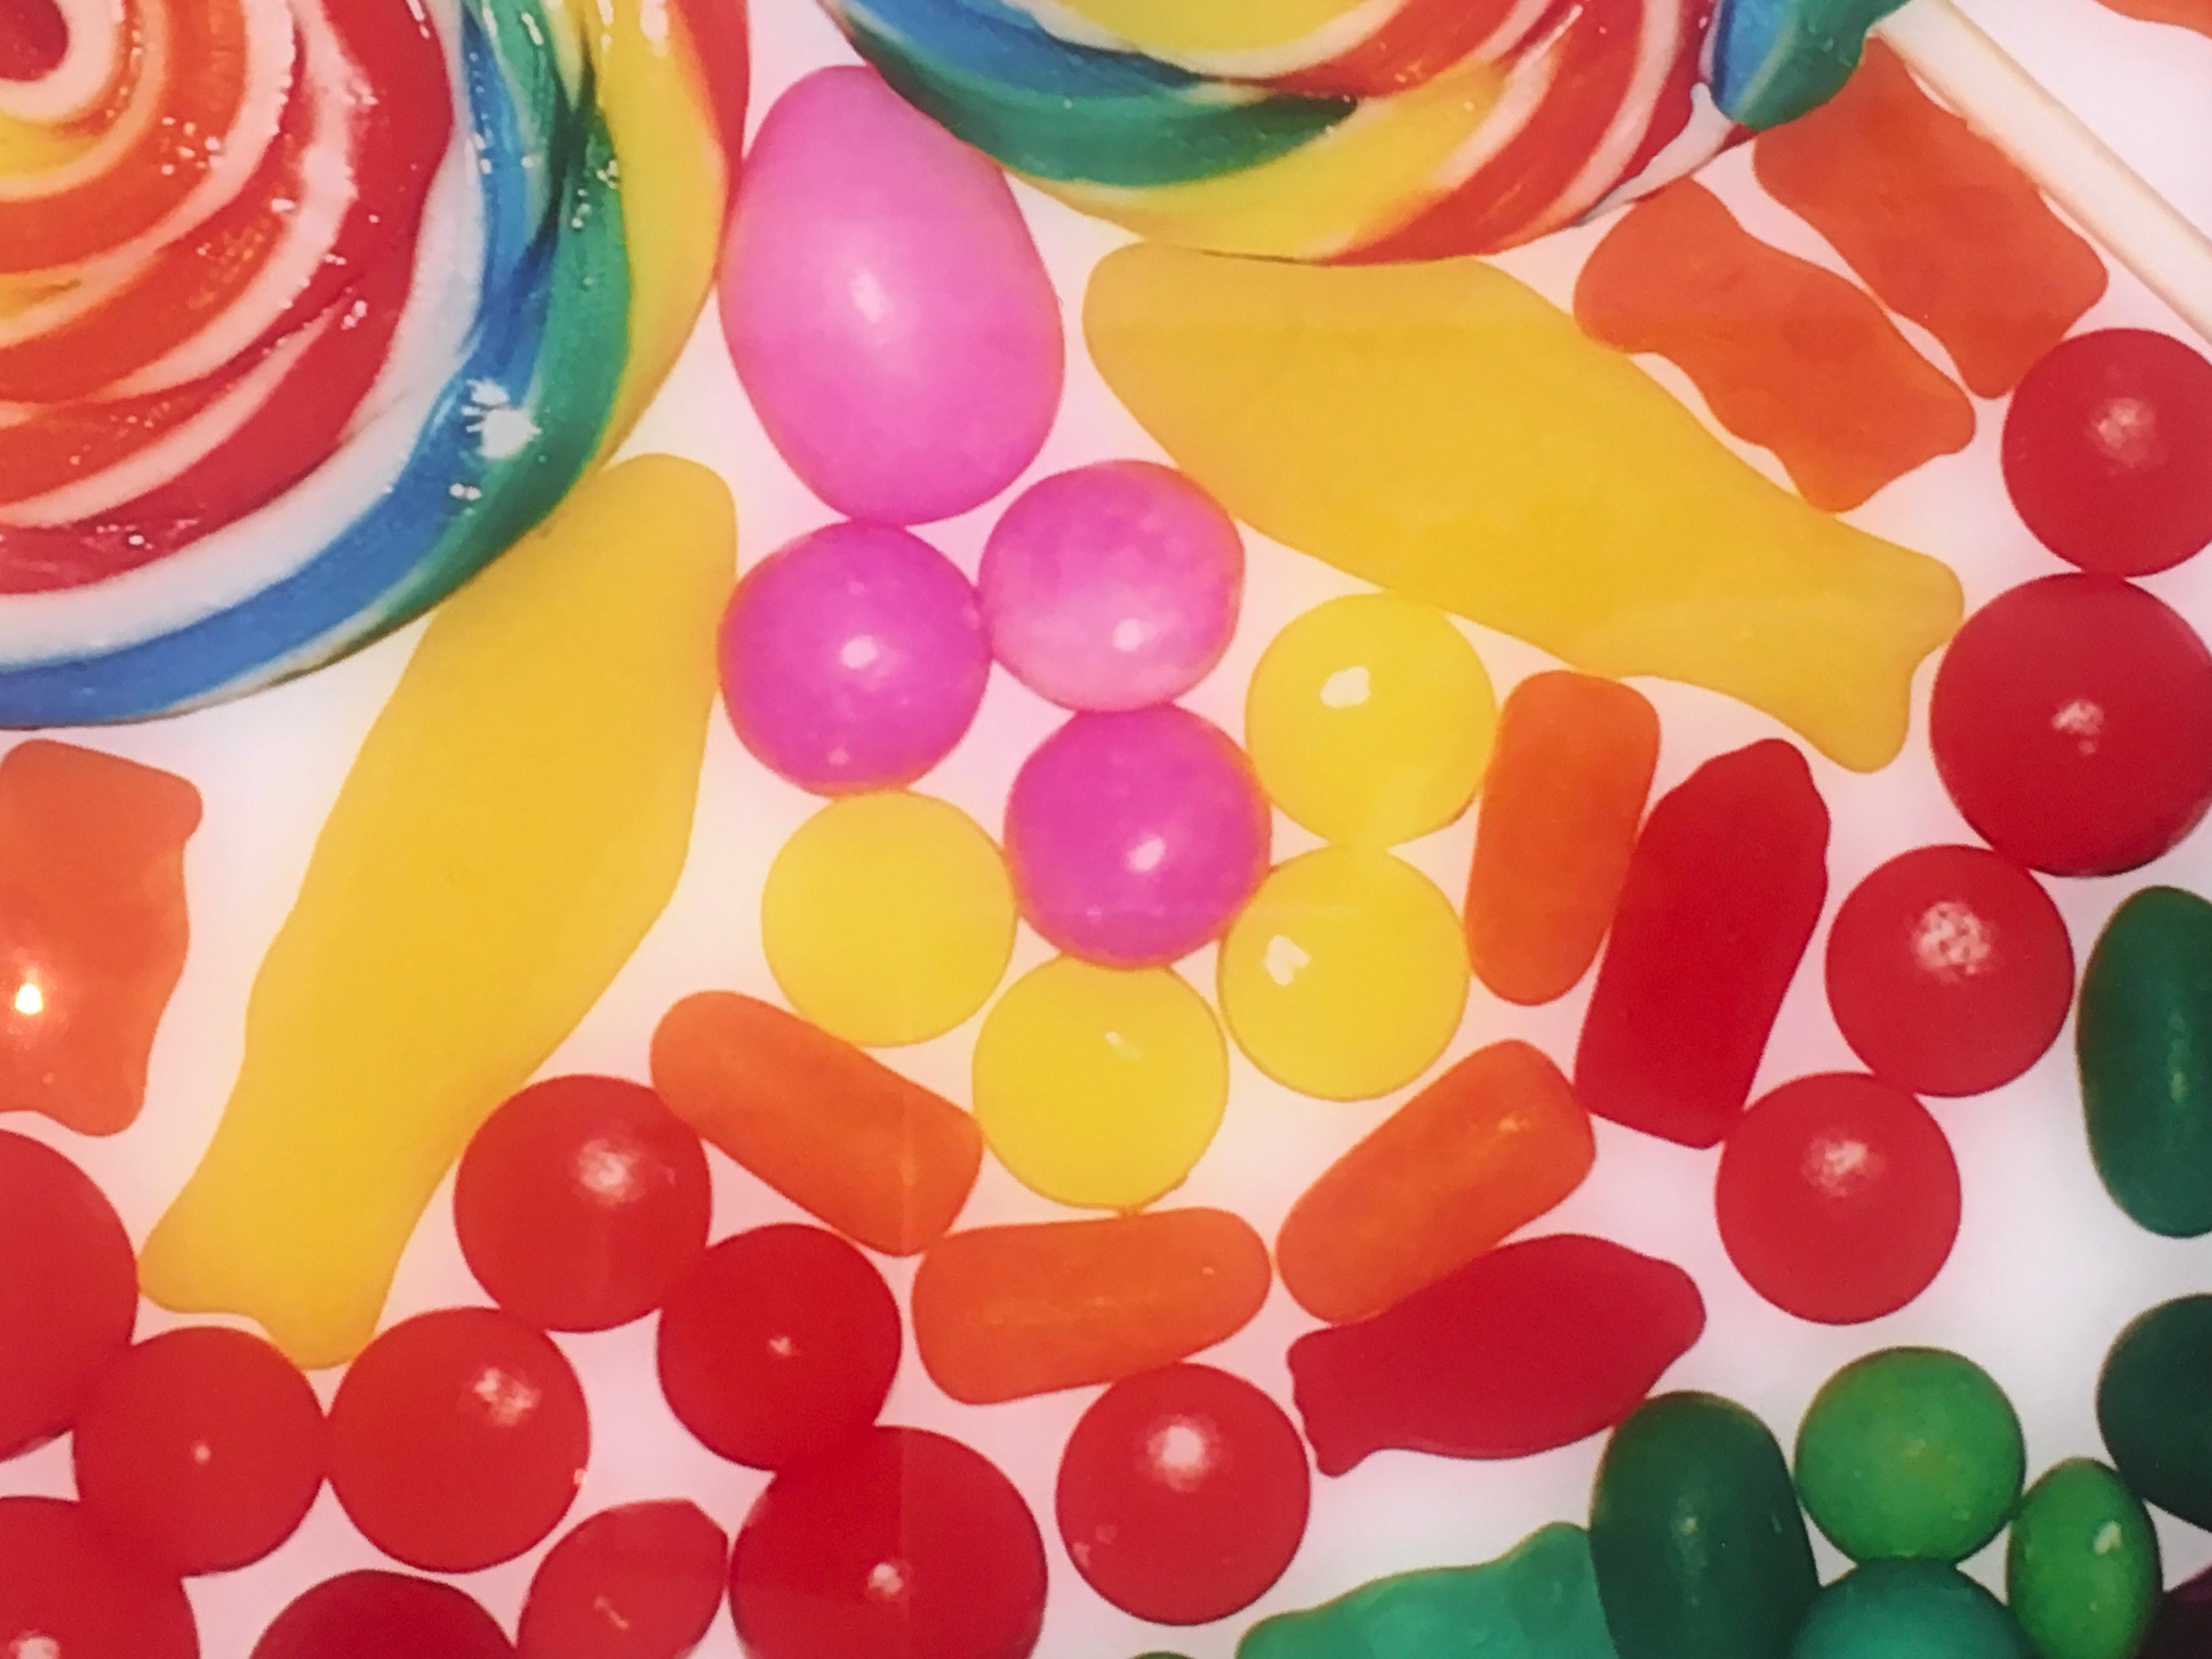 These limited edition photographs are created with pieces of Candy or toys or fruit.  Whirly Pop is filled with colorful lollipops, Swedish Fish, Gummy Bears, Chocolate Kisses and more.  It is a 30x30 plexifacemount, signed and numbered.  It is an